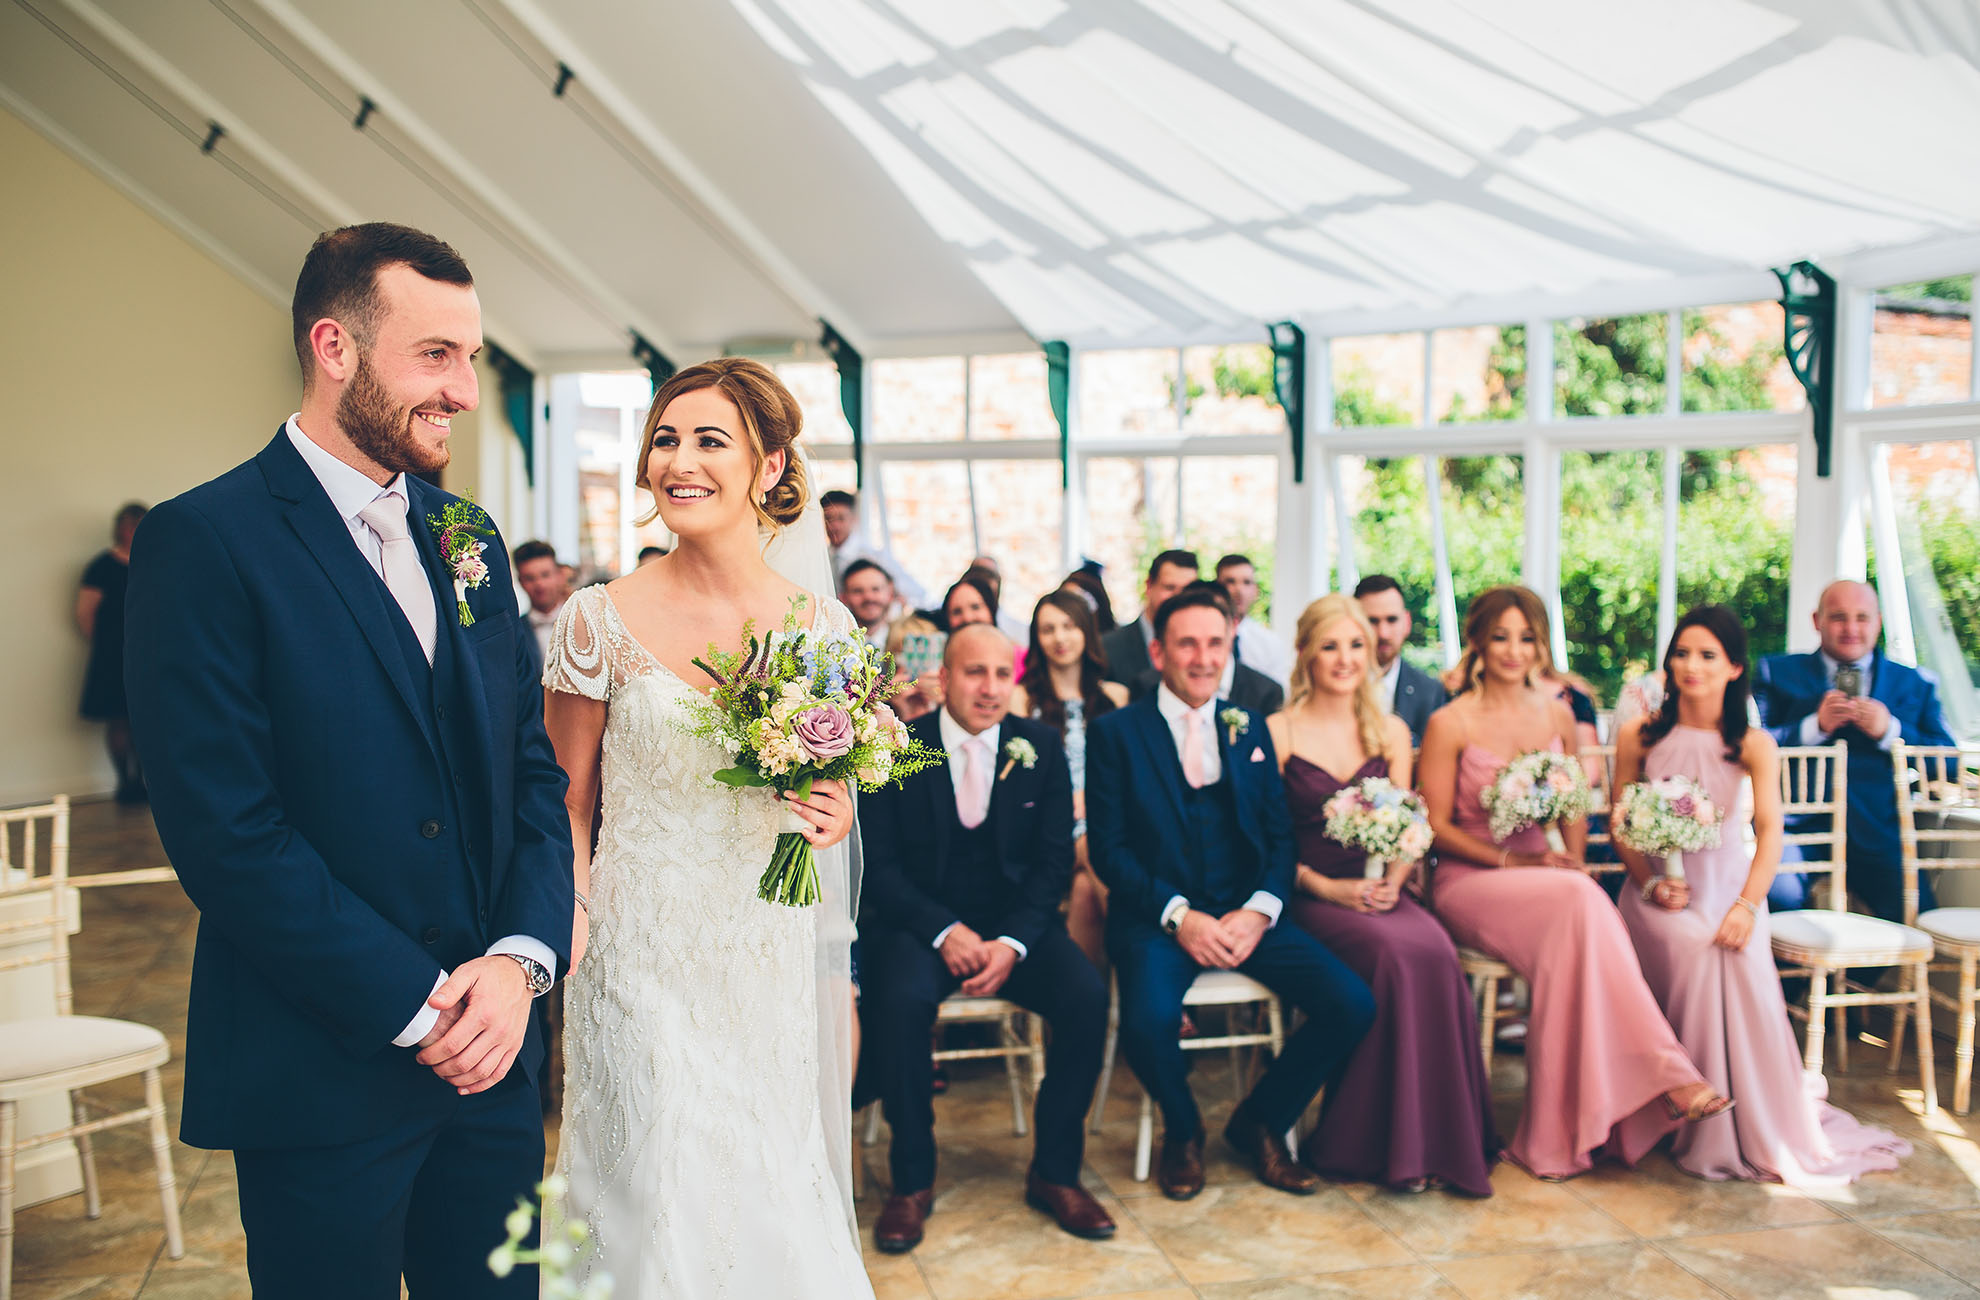 The bride and groom enjoy their wedding ceremony in the Glasshouse at Combermere Abbey